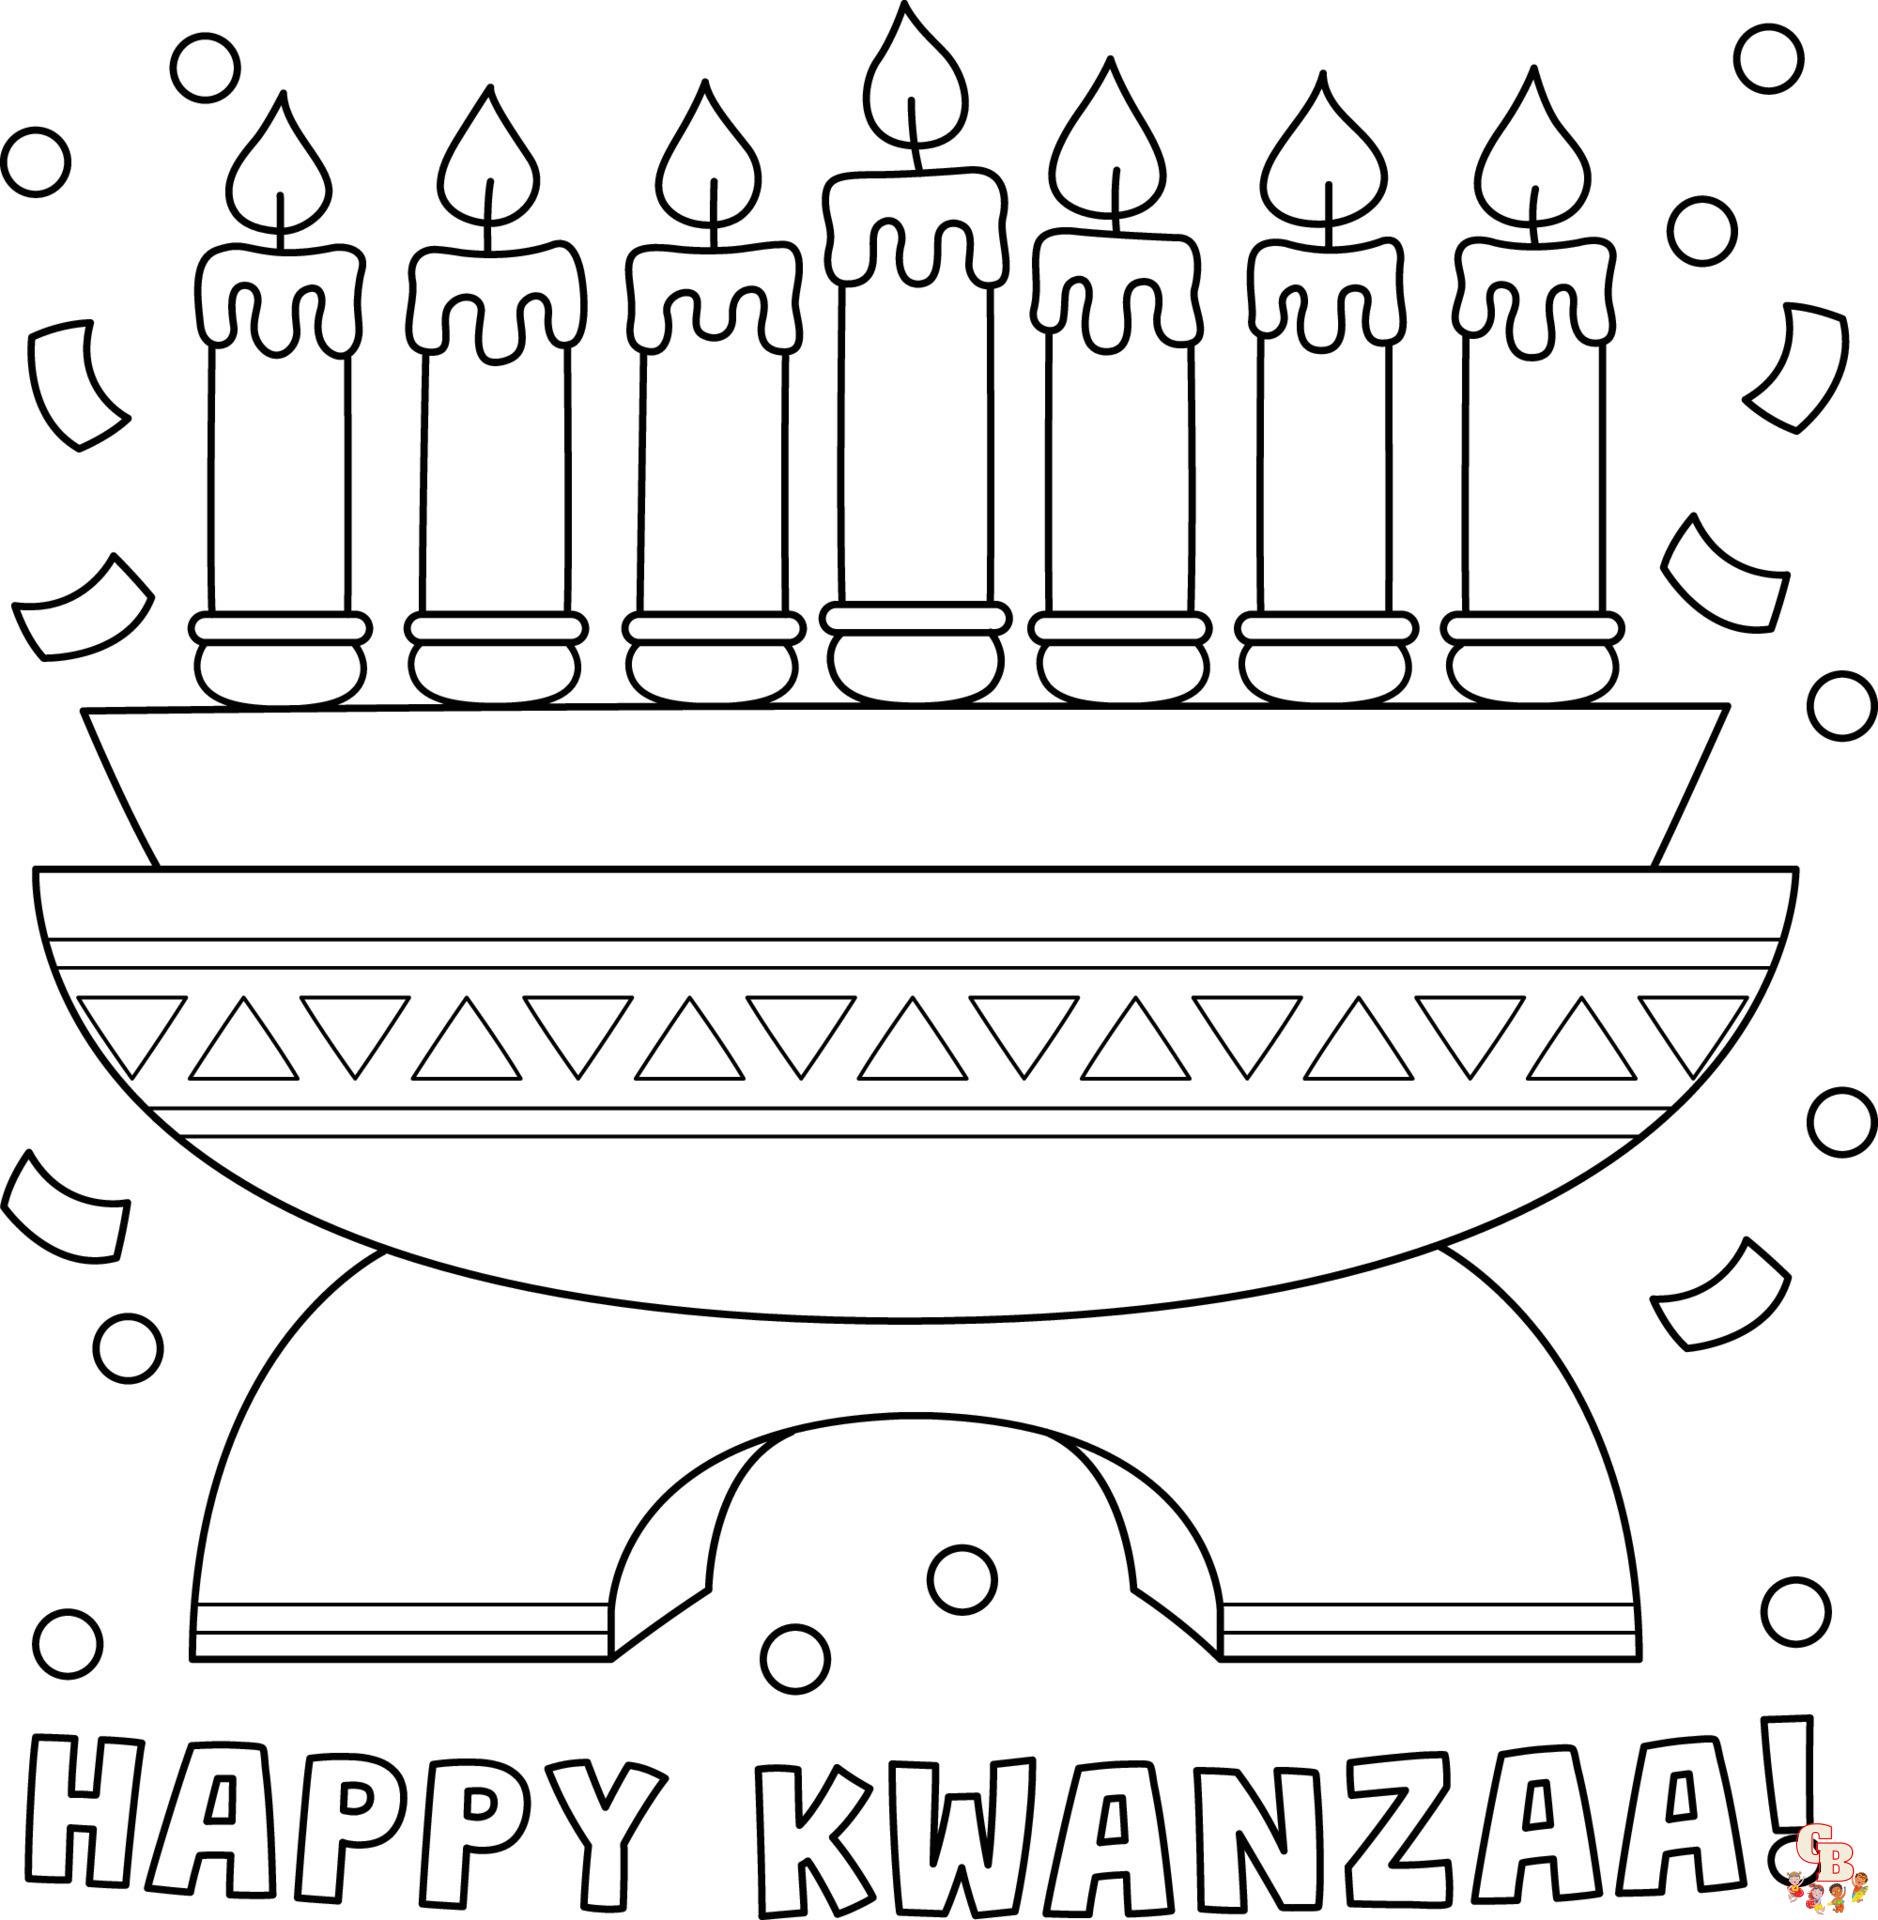 Kwanzaa Coloring Pages 6